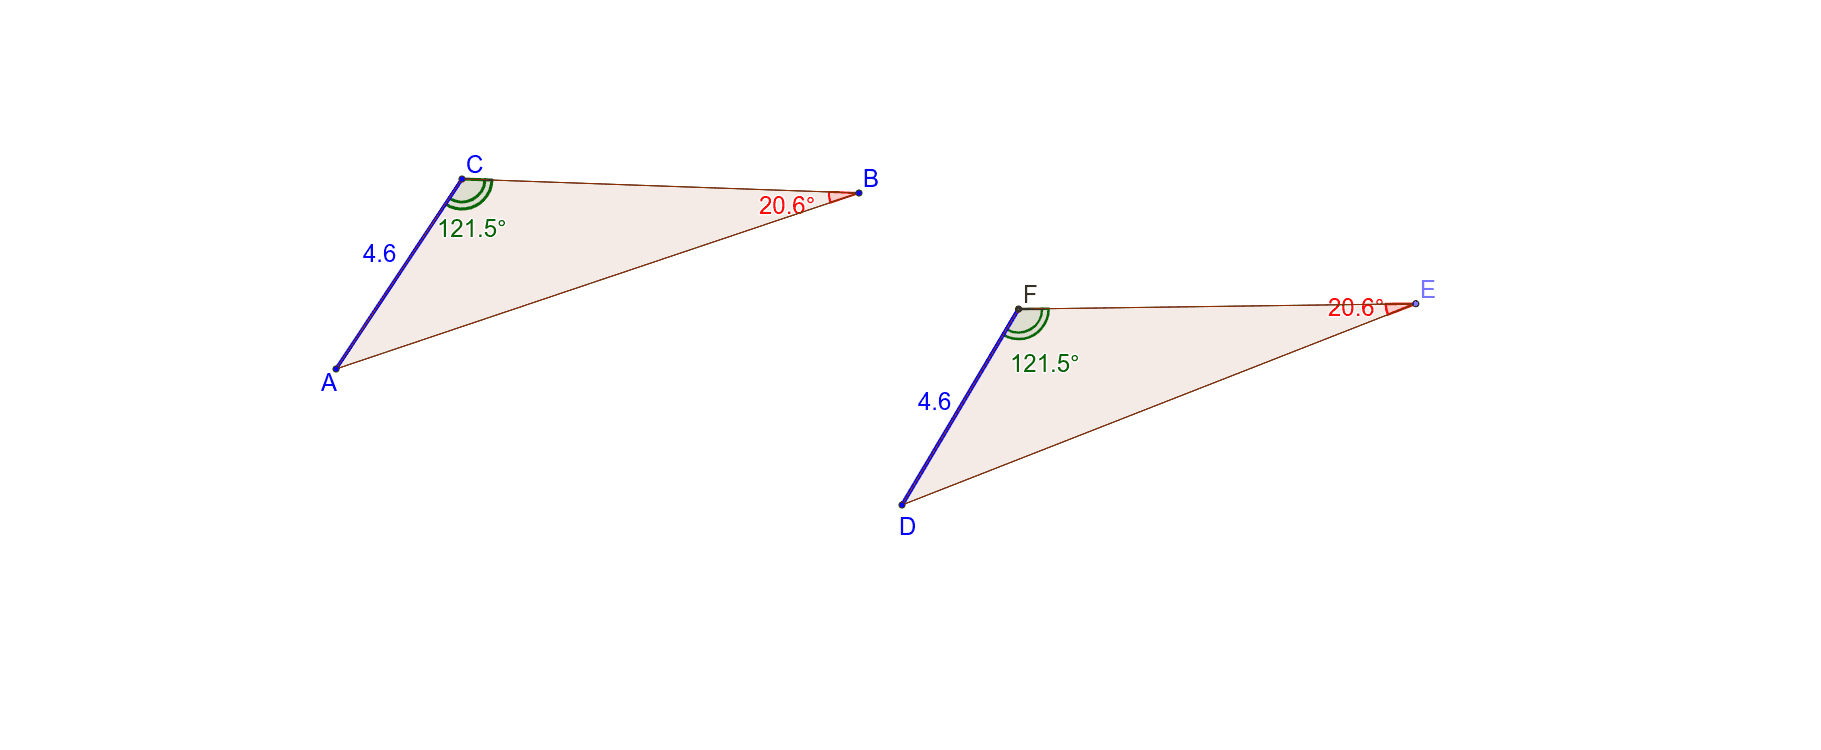 Drag any point on triangle ABC to resize the triangle. Study what happens to triangle DEF when you resize triangle ABC. Also try to coincide (put one triangle on top of the other) and see if they match up. Press Enter to start activity